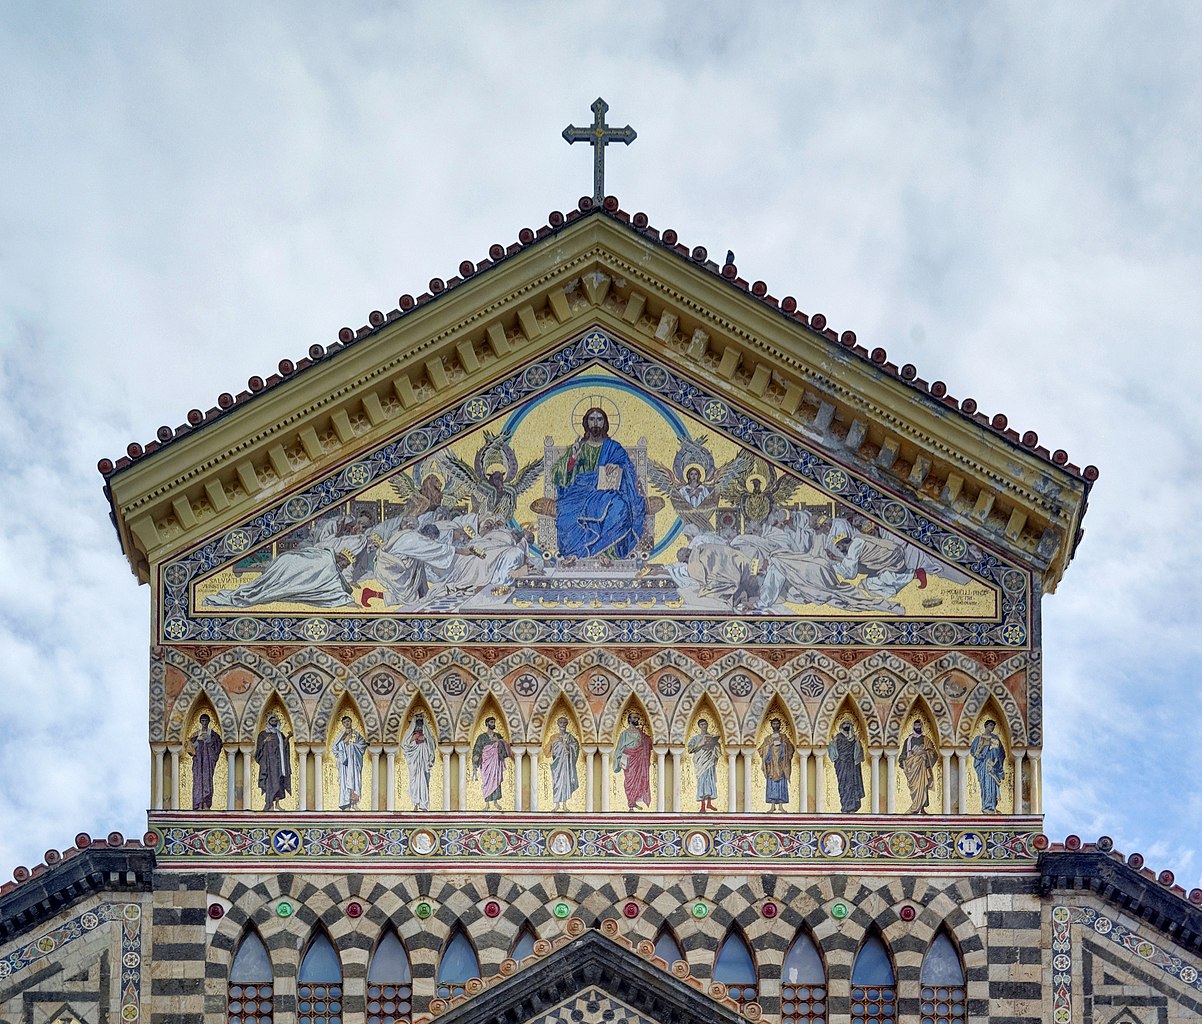 The mosaics on the facade. Photo: Berthold Werner